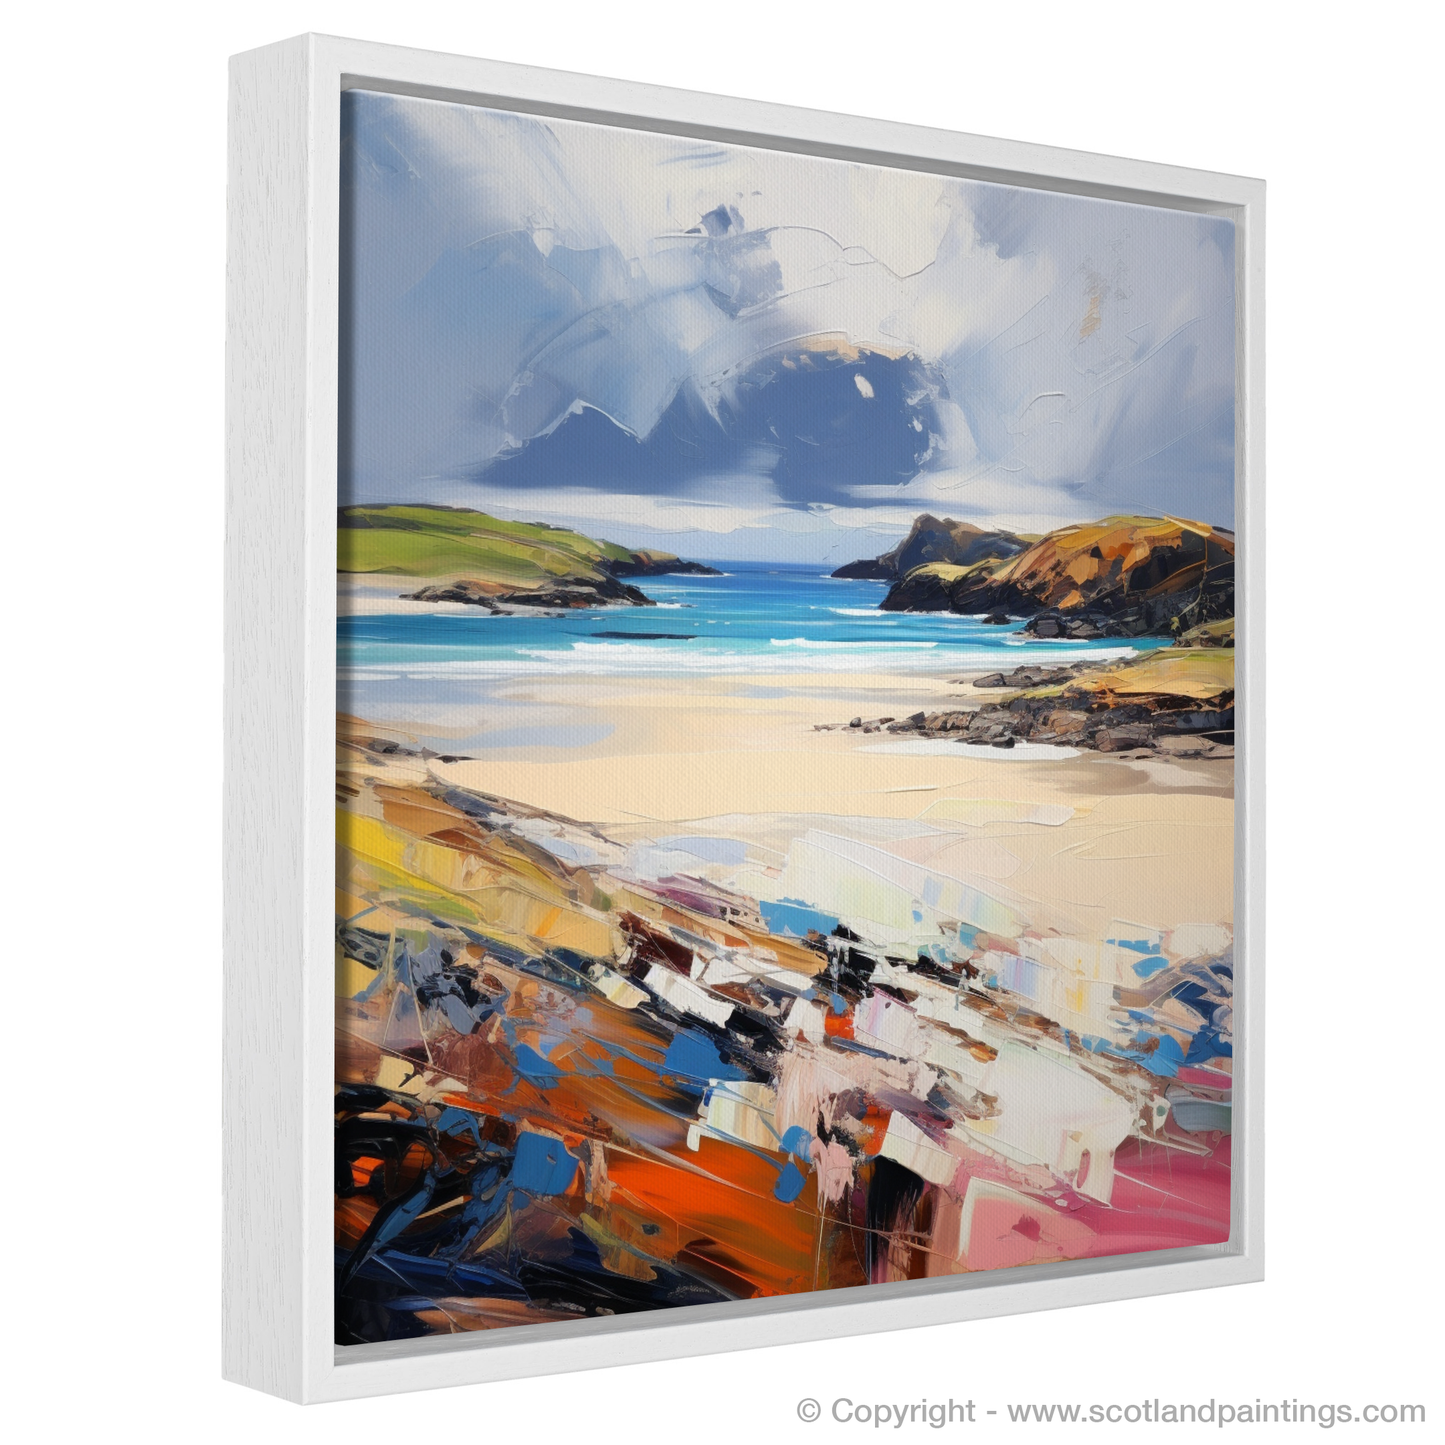 Painting and Art Print of Balnakeil Bay, Durness, Sutherland entitled "Wild Winds and Vivid Skies: An Expressionist Ode to Balnakeil Bay".